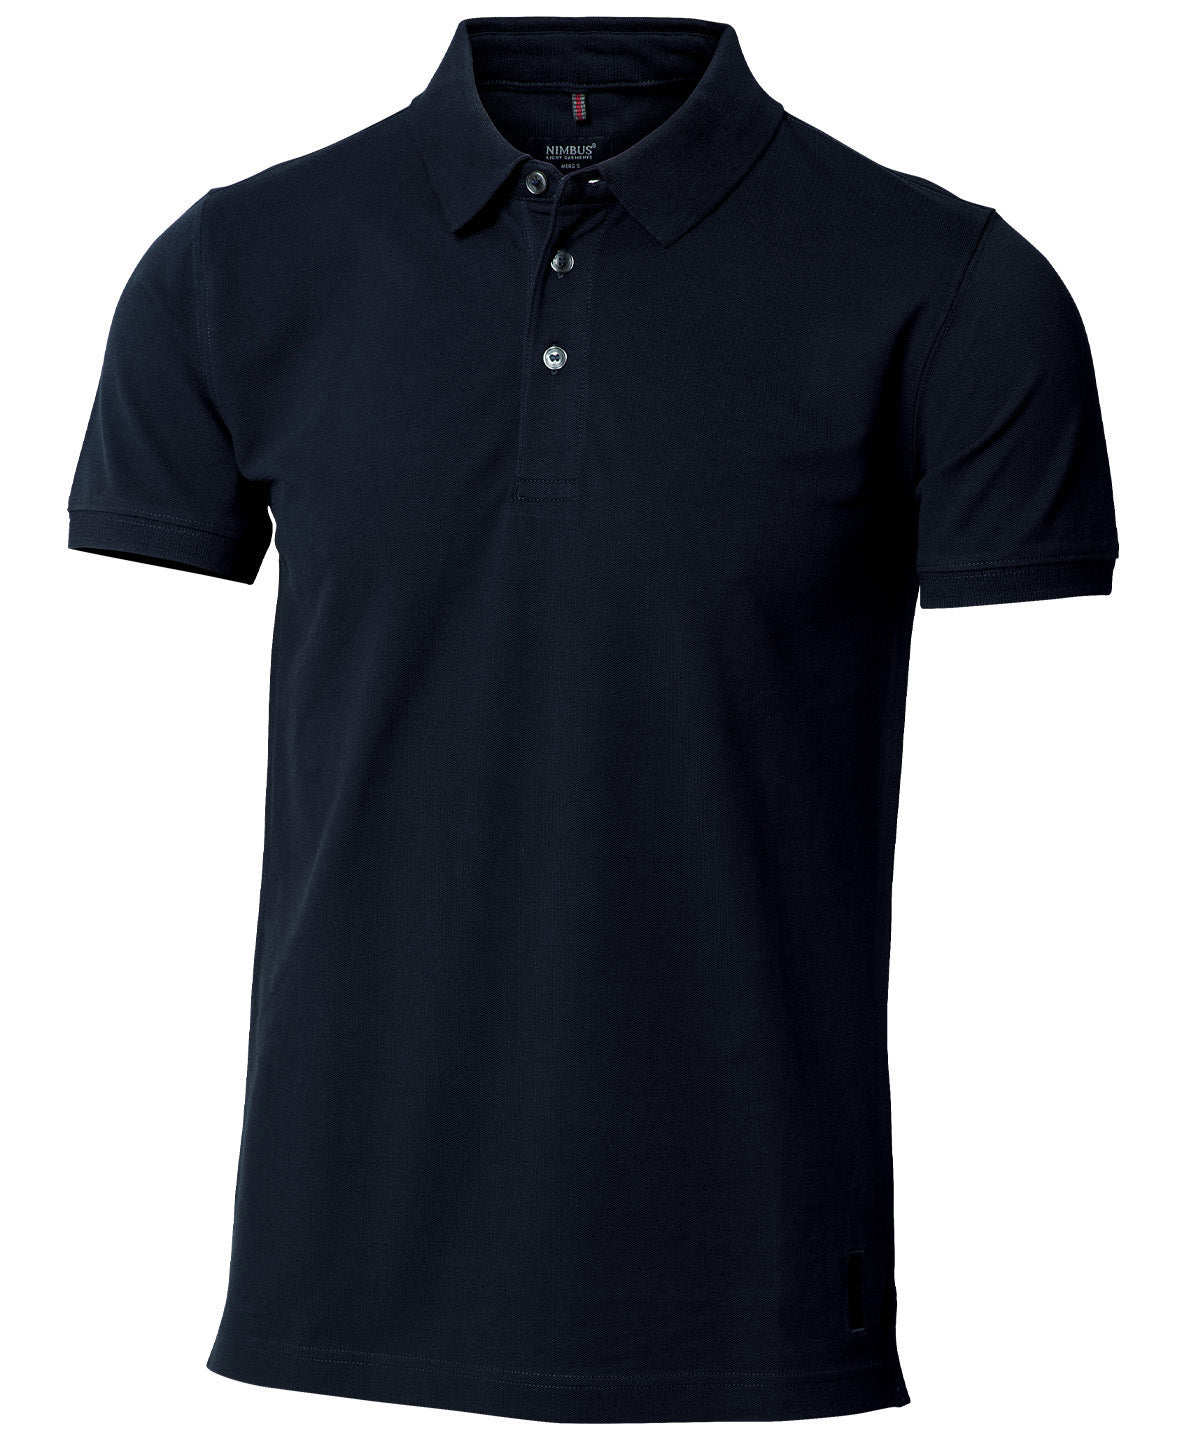 Personalised Polo Shirts - Black Nimbus Harvard classic – stretch deluxe polo